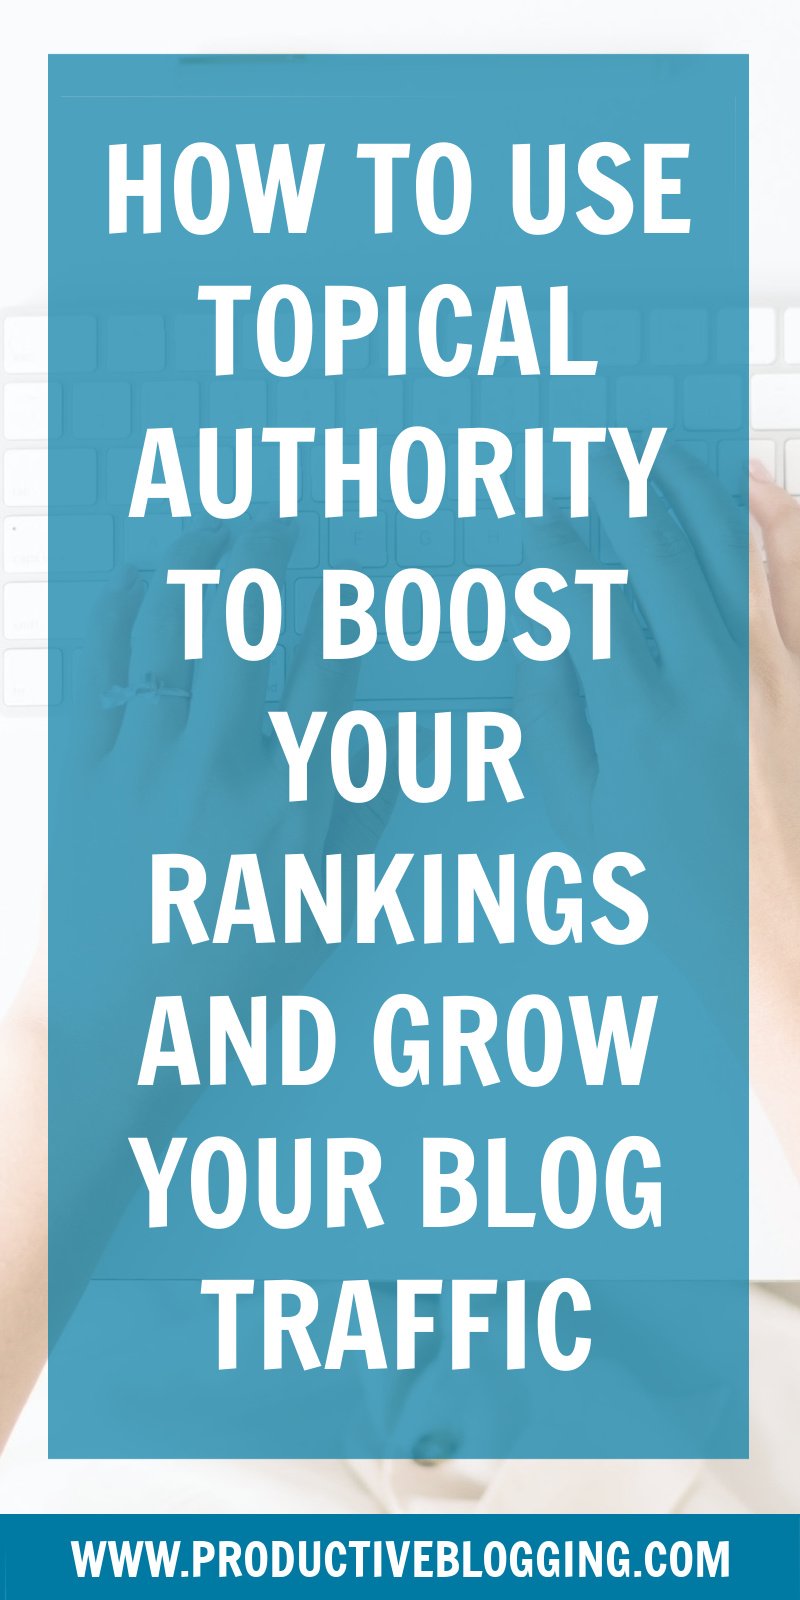 Building topical authority is one of the best ways to rank higher in Google’s search results and grow your website traffic. Better still it’s easy to do and you have complete control (unlike domain authority). Want to learn how to do it? Here’s my complete guide on how to use topical authority to boost your rankings and grow your blog traffic. #topicalauthority #SEO #SEOtips #SEOhacks #searchengineoptimization #bloggingtips #blogtips #blogging #bloggers #productiveblogging